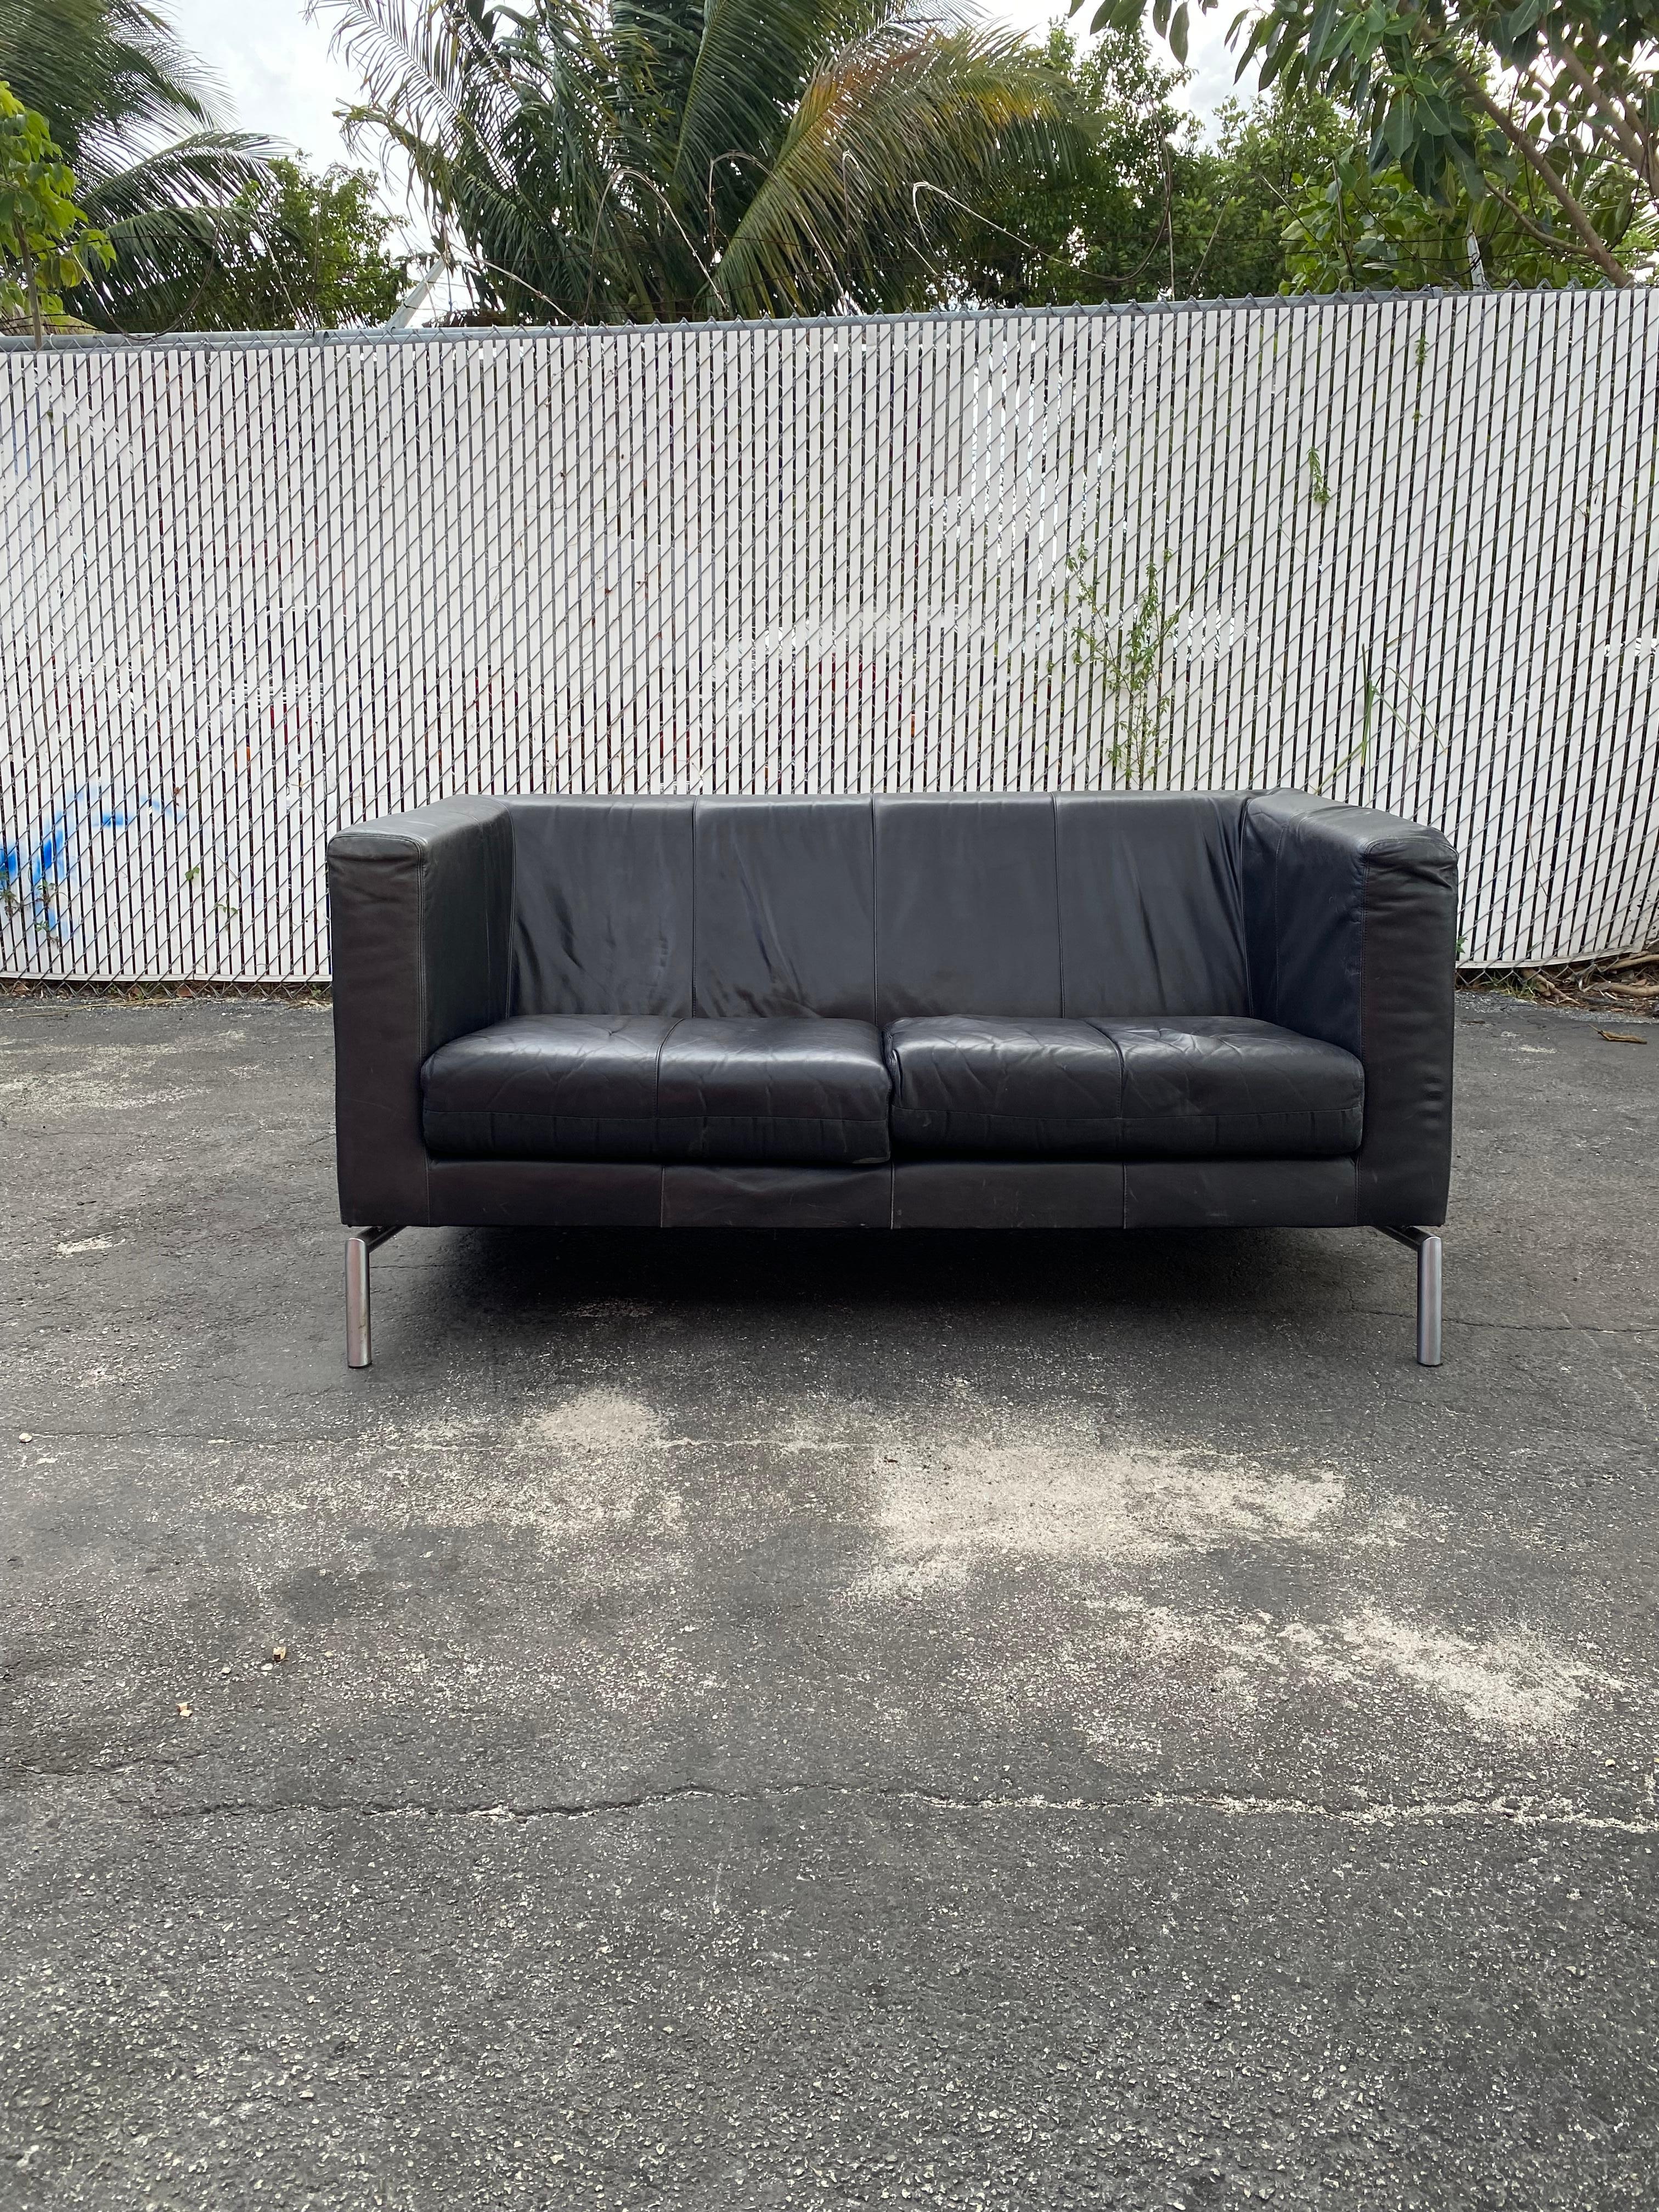 On offer on this occasion is one of the most stunning, leather and chrome loveseat you could hope to find. In the style of Hans Wegner.  Outstanding design is exhibited throughout. The beautiful sofa is a statement piece which is also extremely